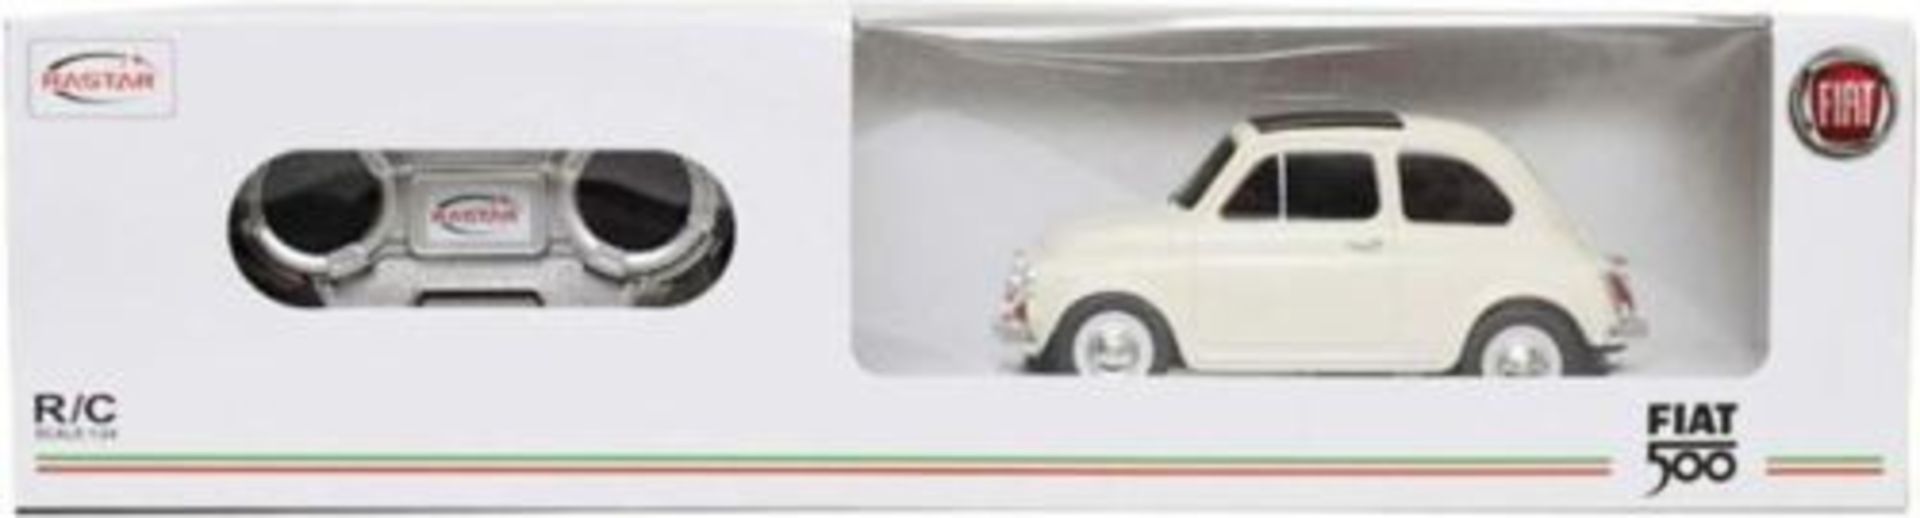 V *TRADE QTY* Brand New 1:24 Scale Radio Control Fiat 500 - Fully Licensed X 5 YOUR BID PRICE TO